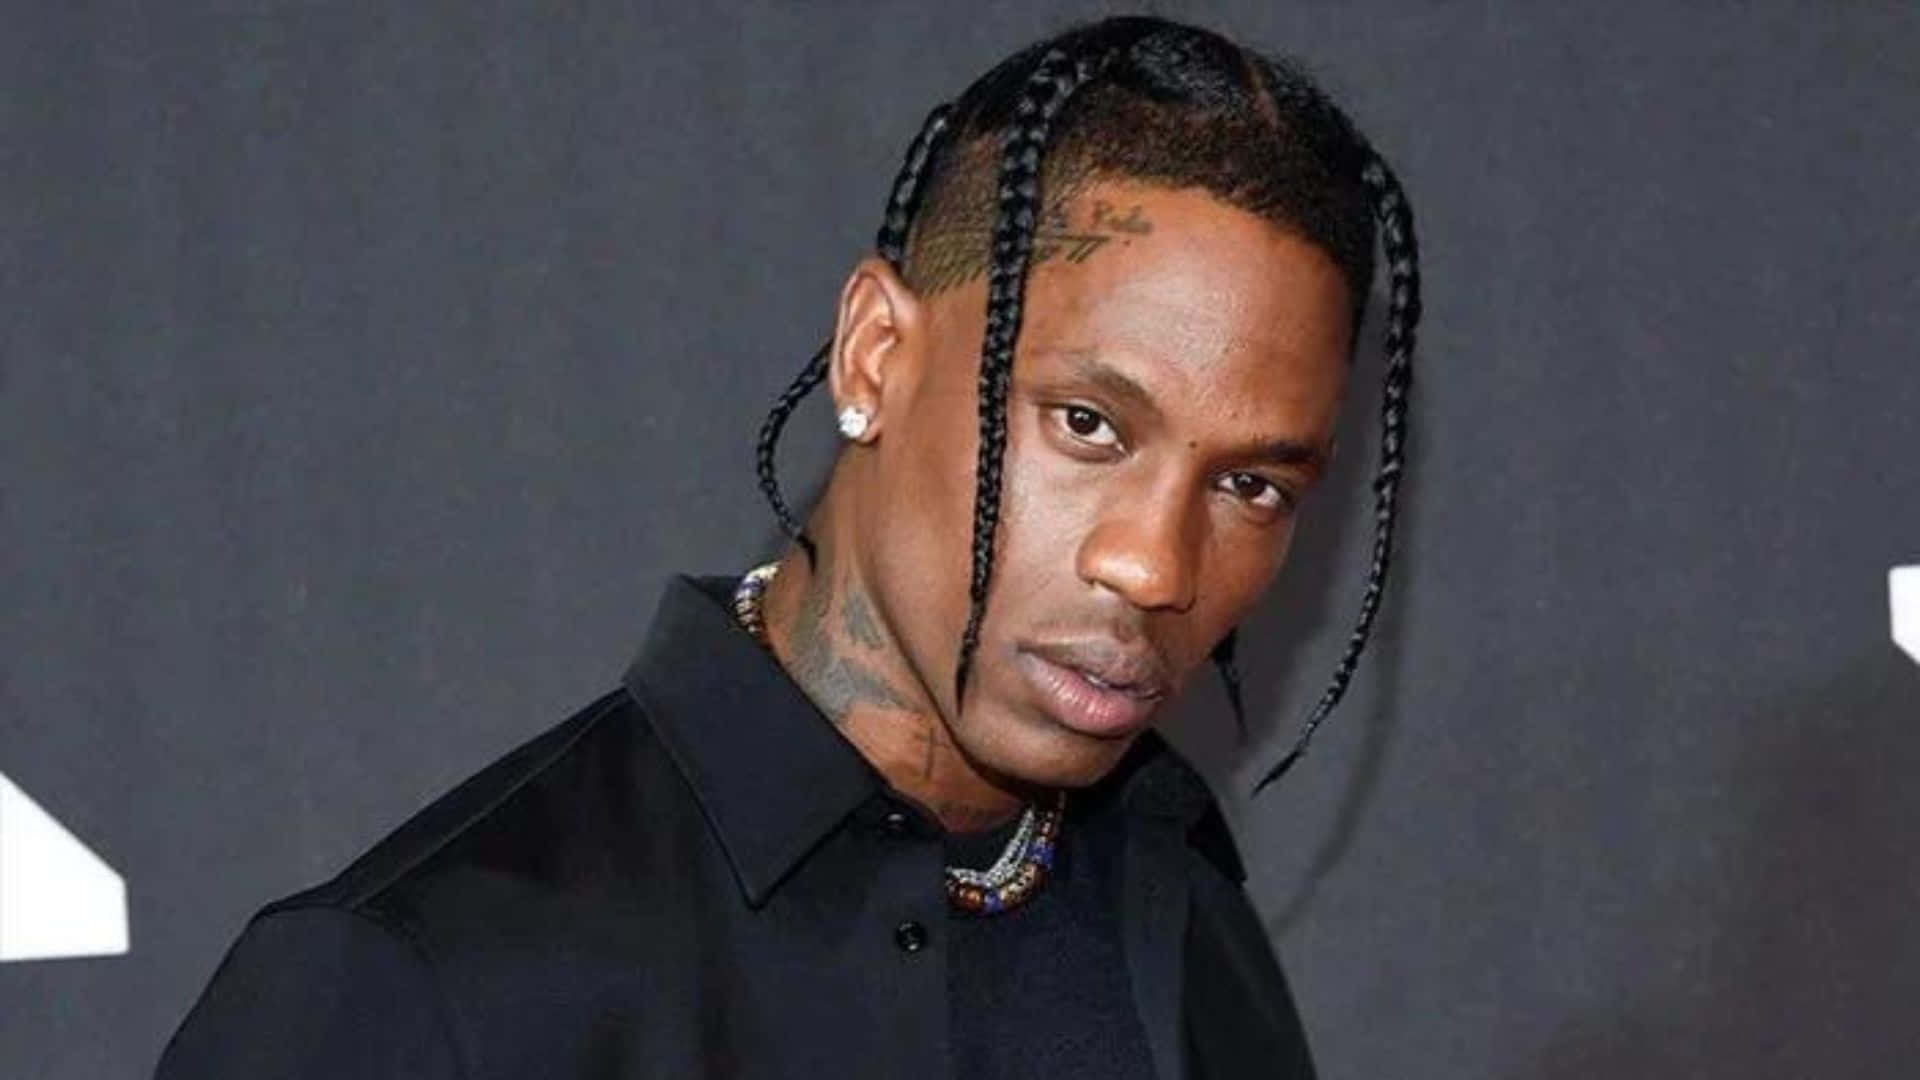 Sit back, relax and enjoy the success of Travis Scott, American rapper, singer and producer